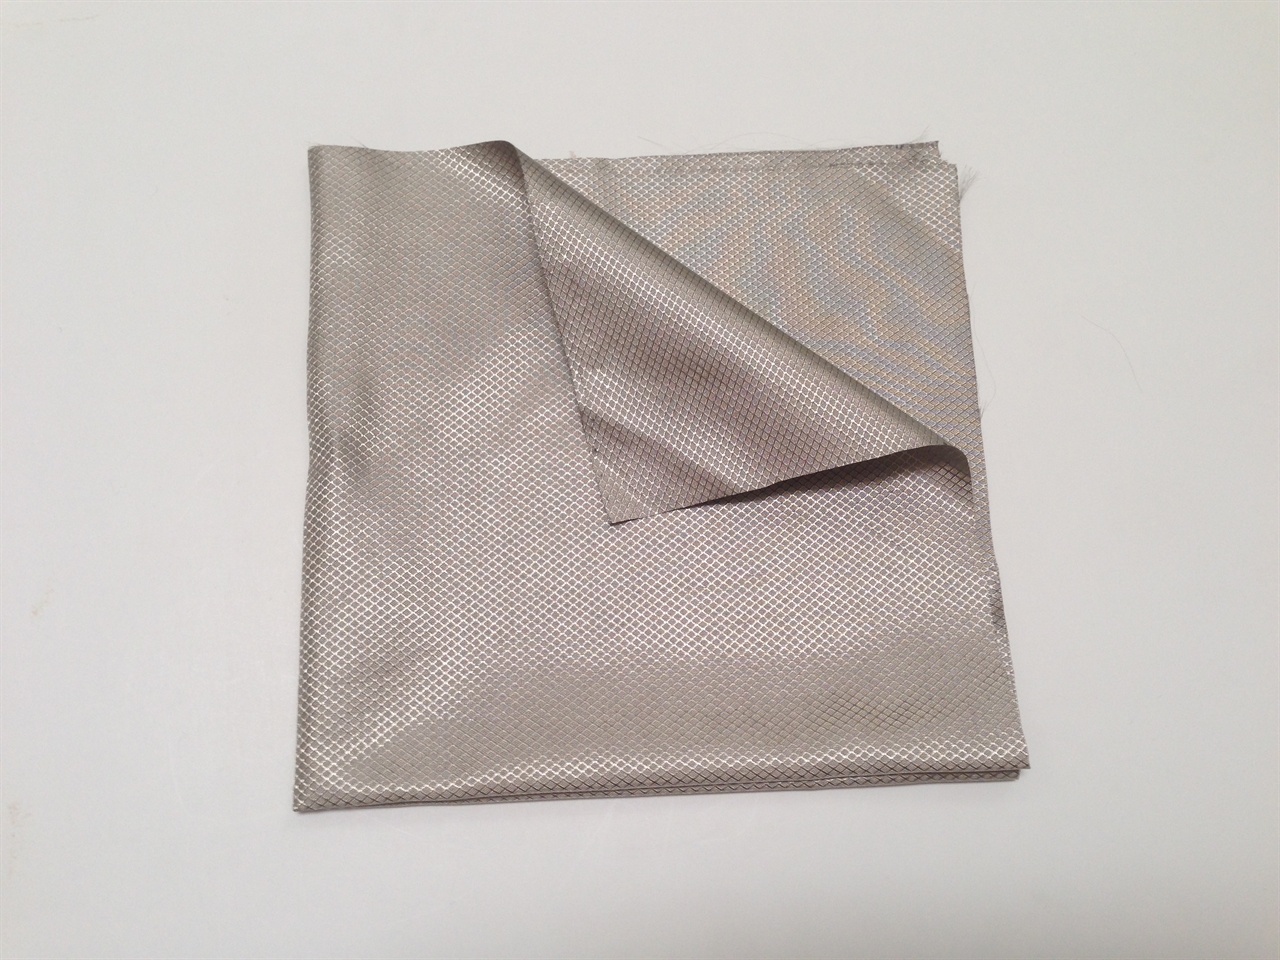 OURSURE - Radiation Protection Products. RFID protect, RF Radiation  Shielding Conductive Fabrics